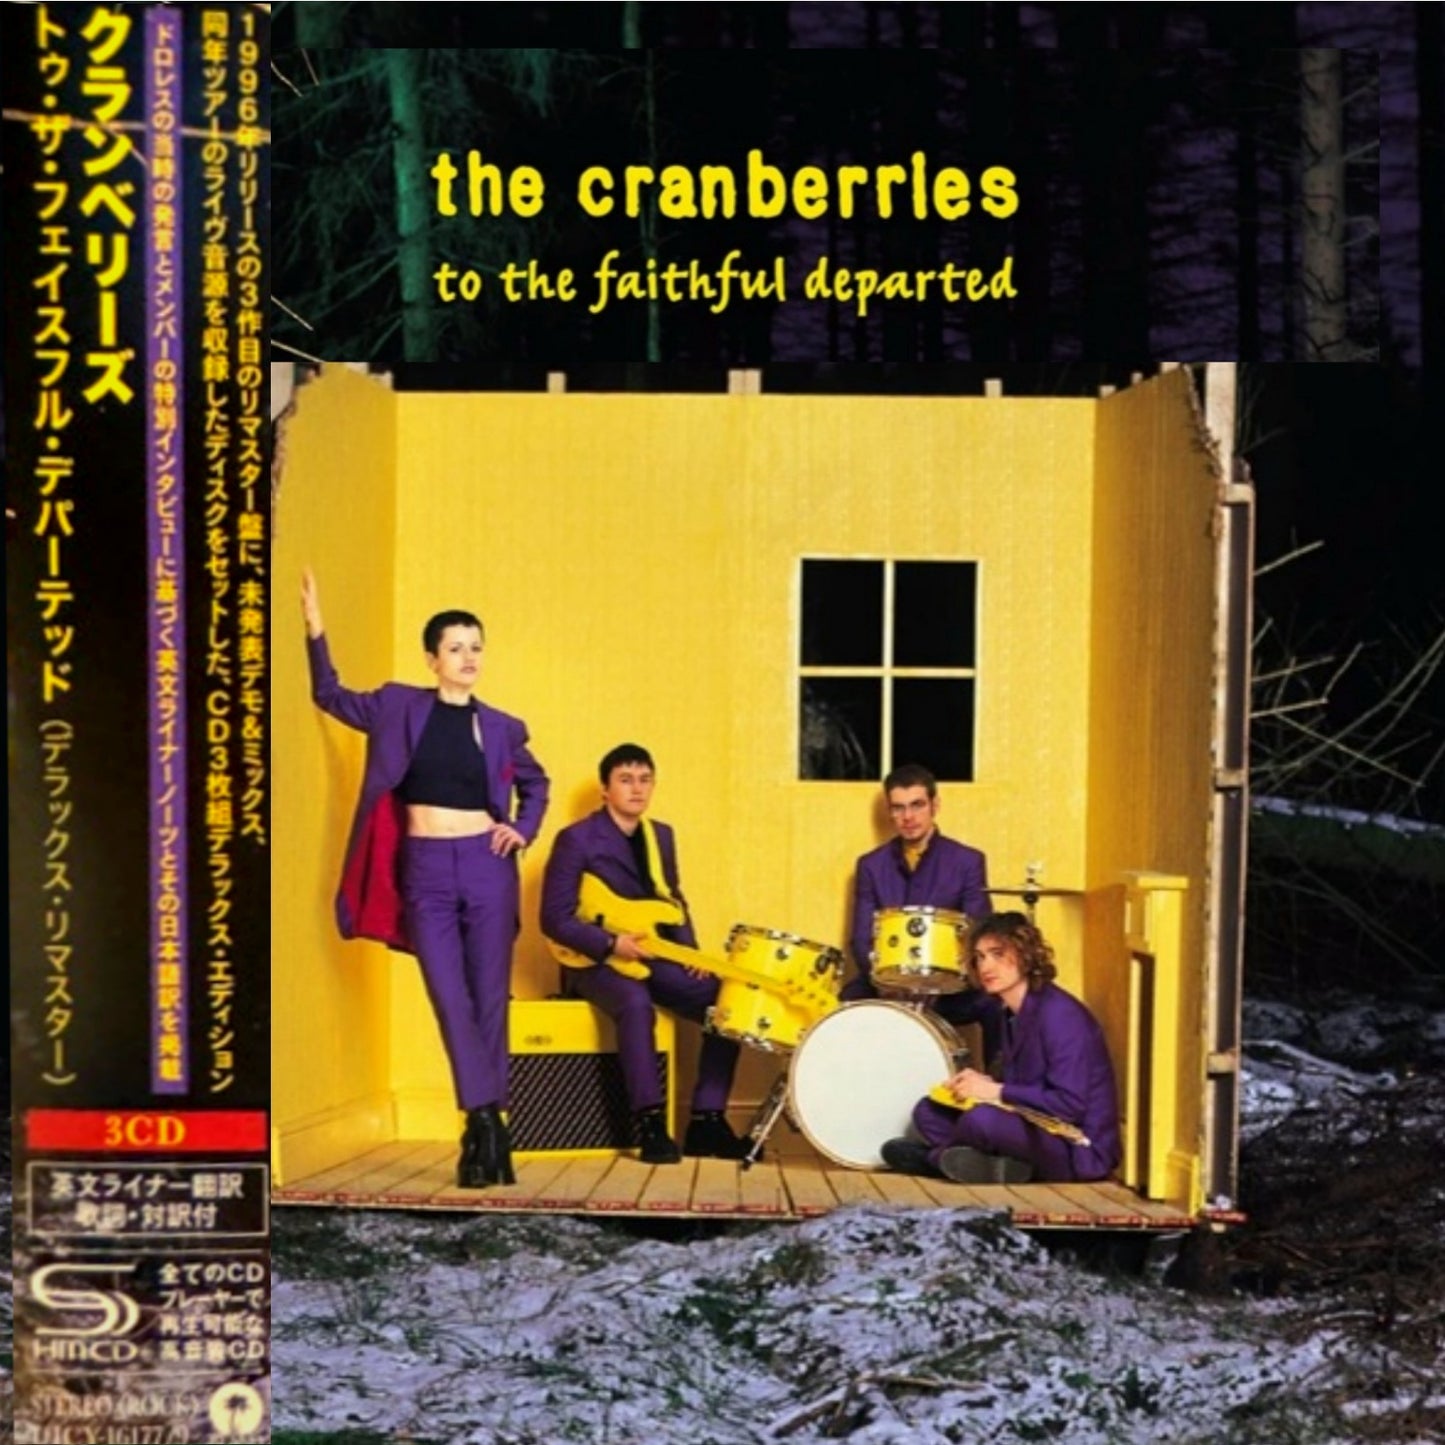 The_Cranberries_To_The_Faithful-Departed_Deluxe_Japanese_3SHM-CD